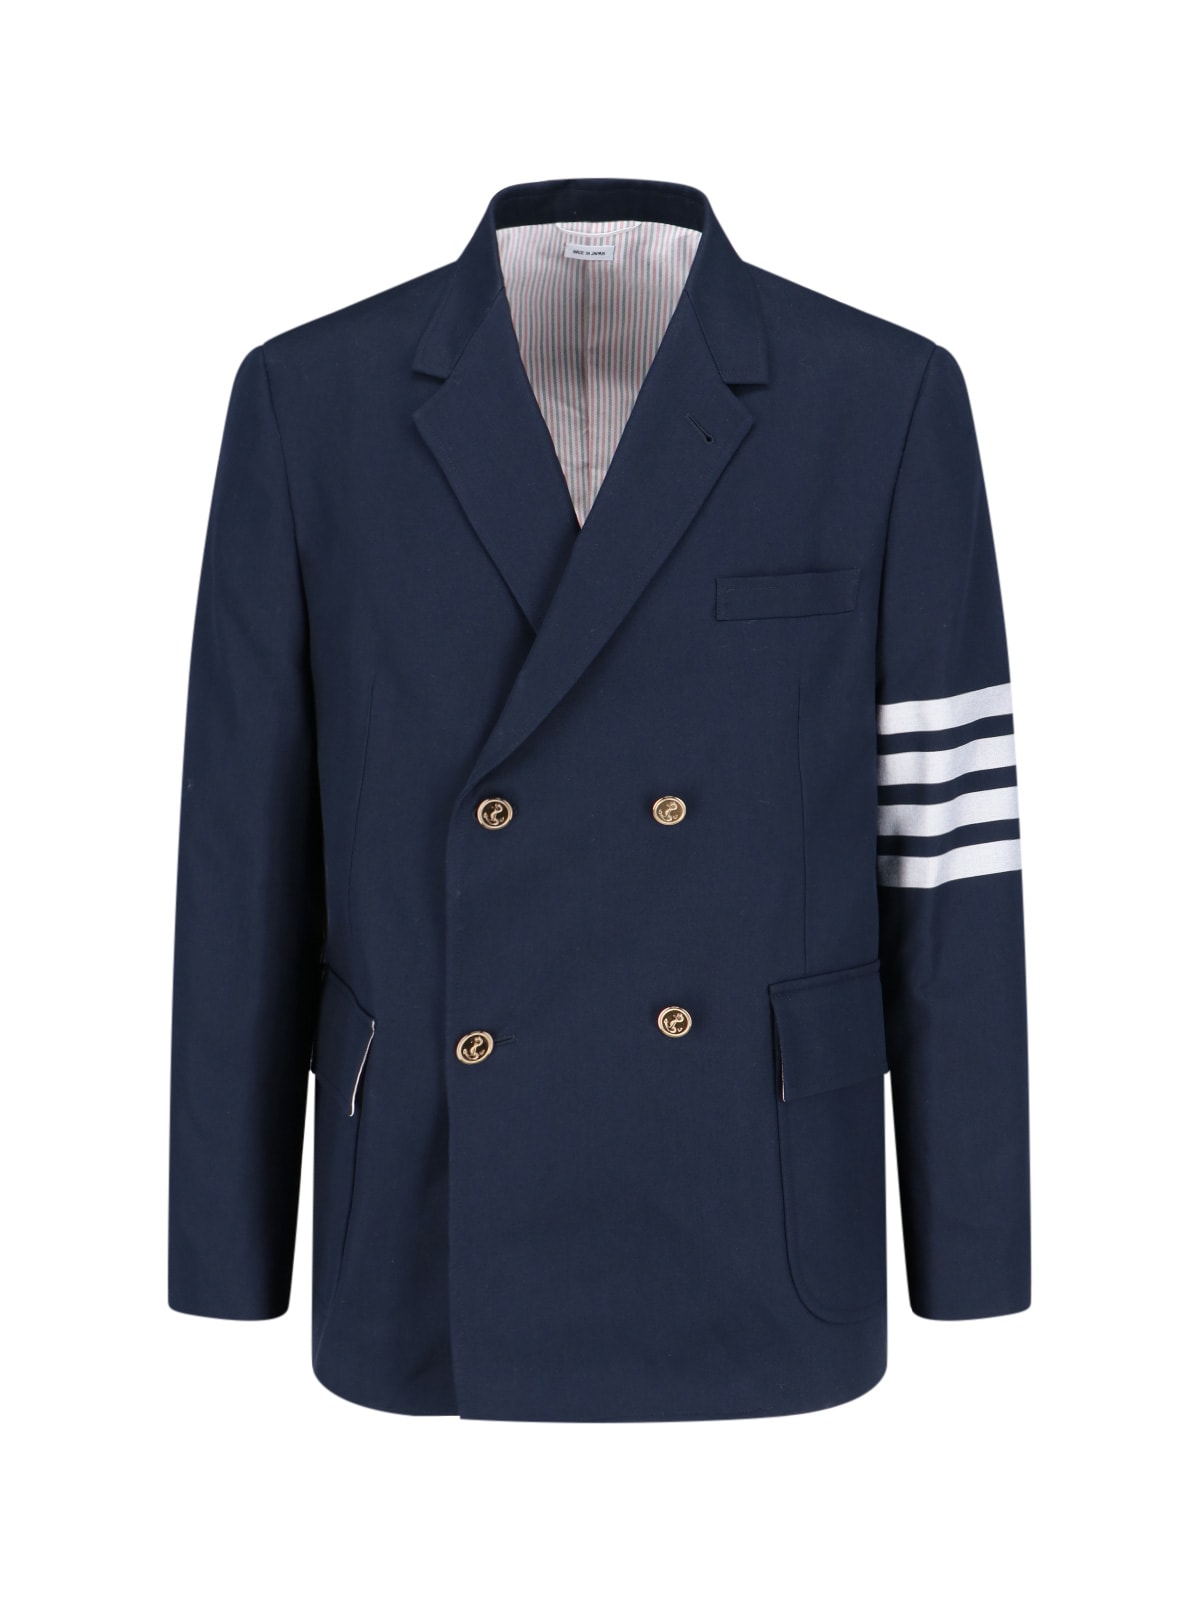 THOM BROWNE DOUBLE-BREASTED BLAZER